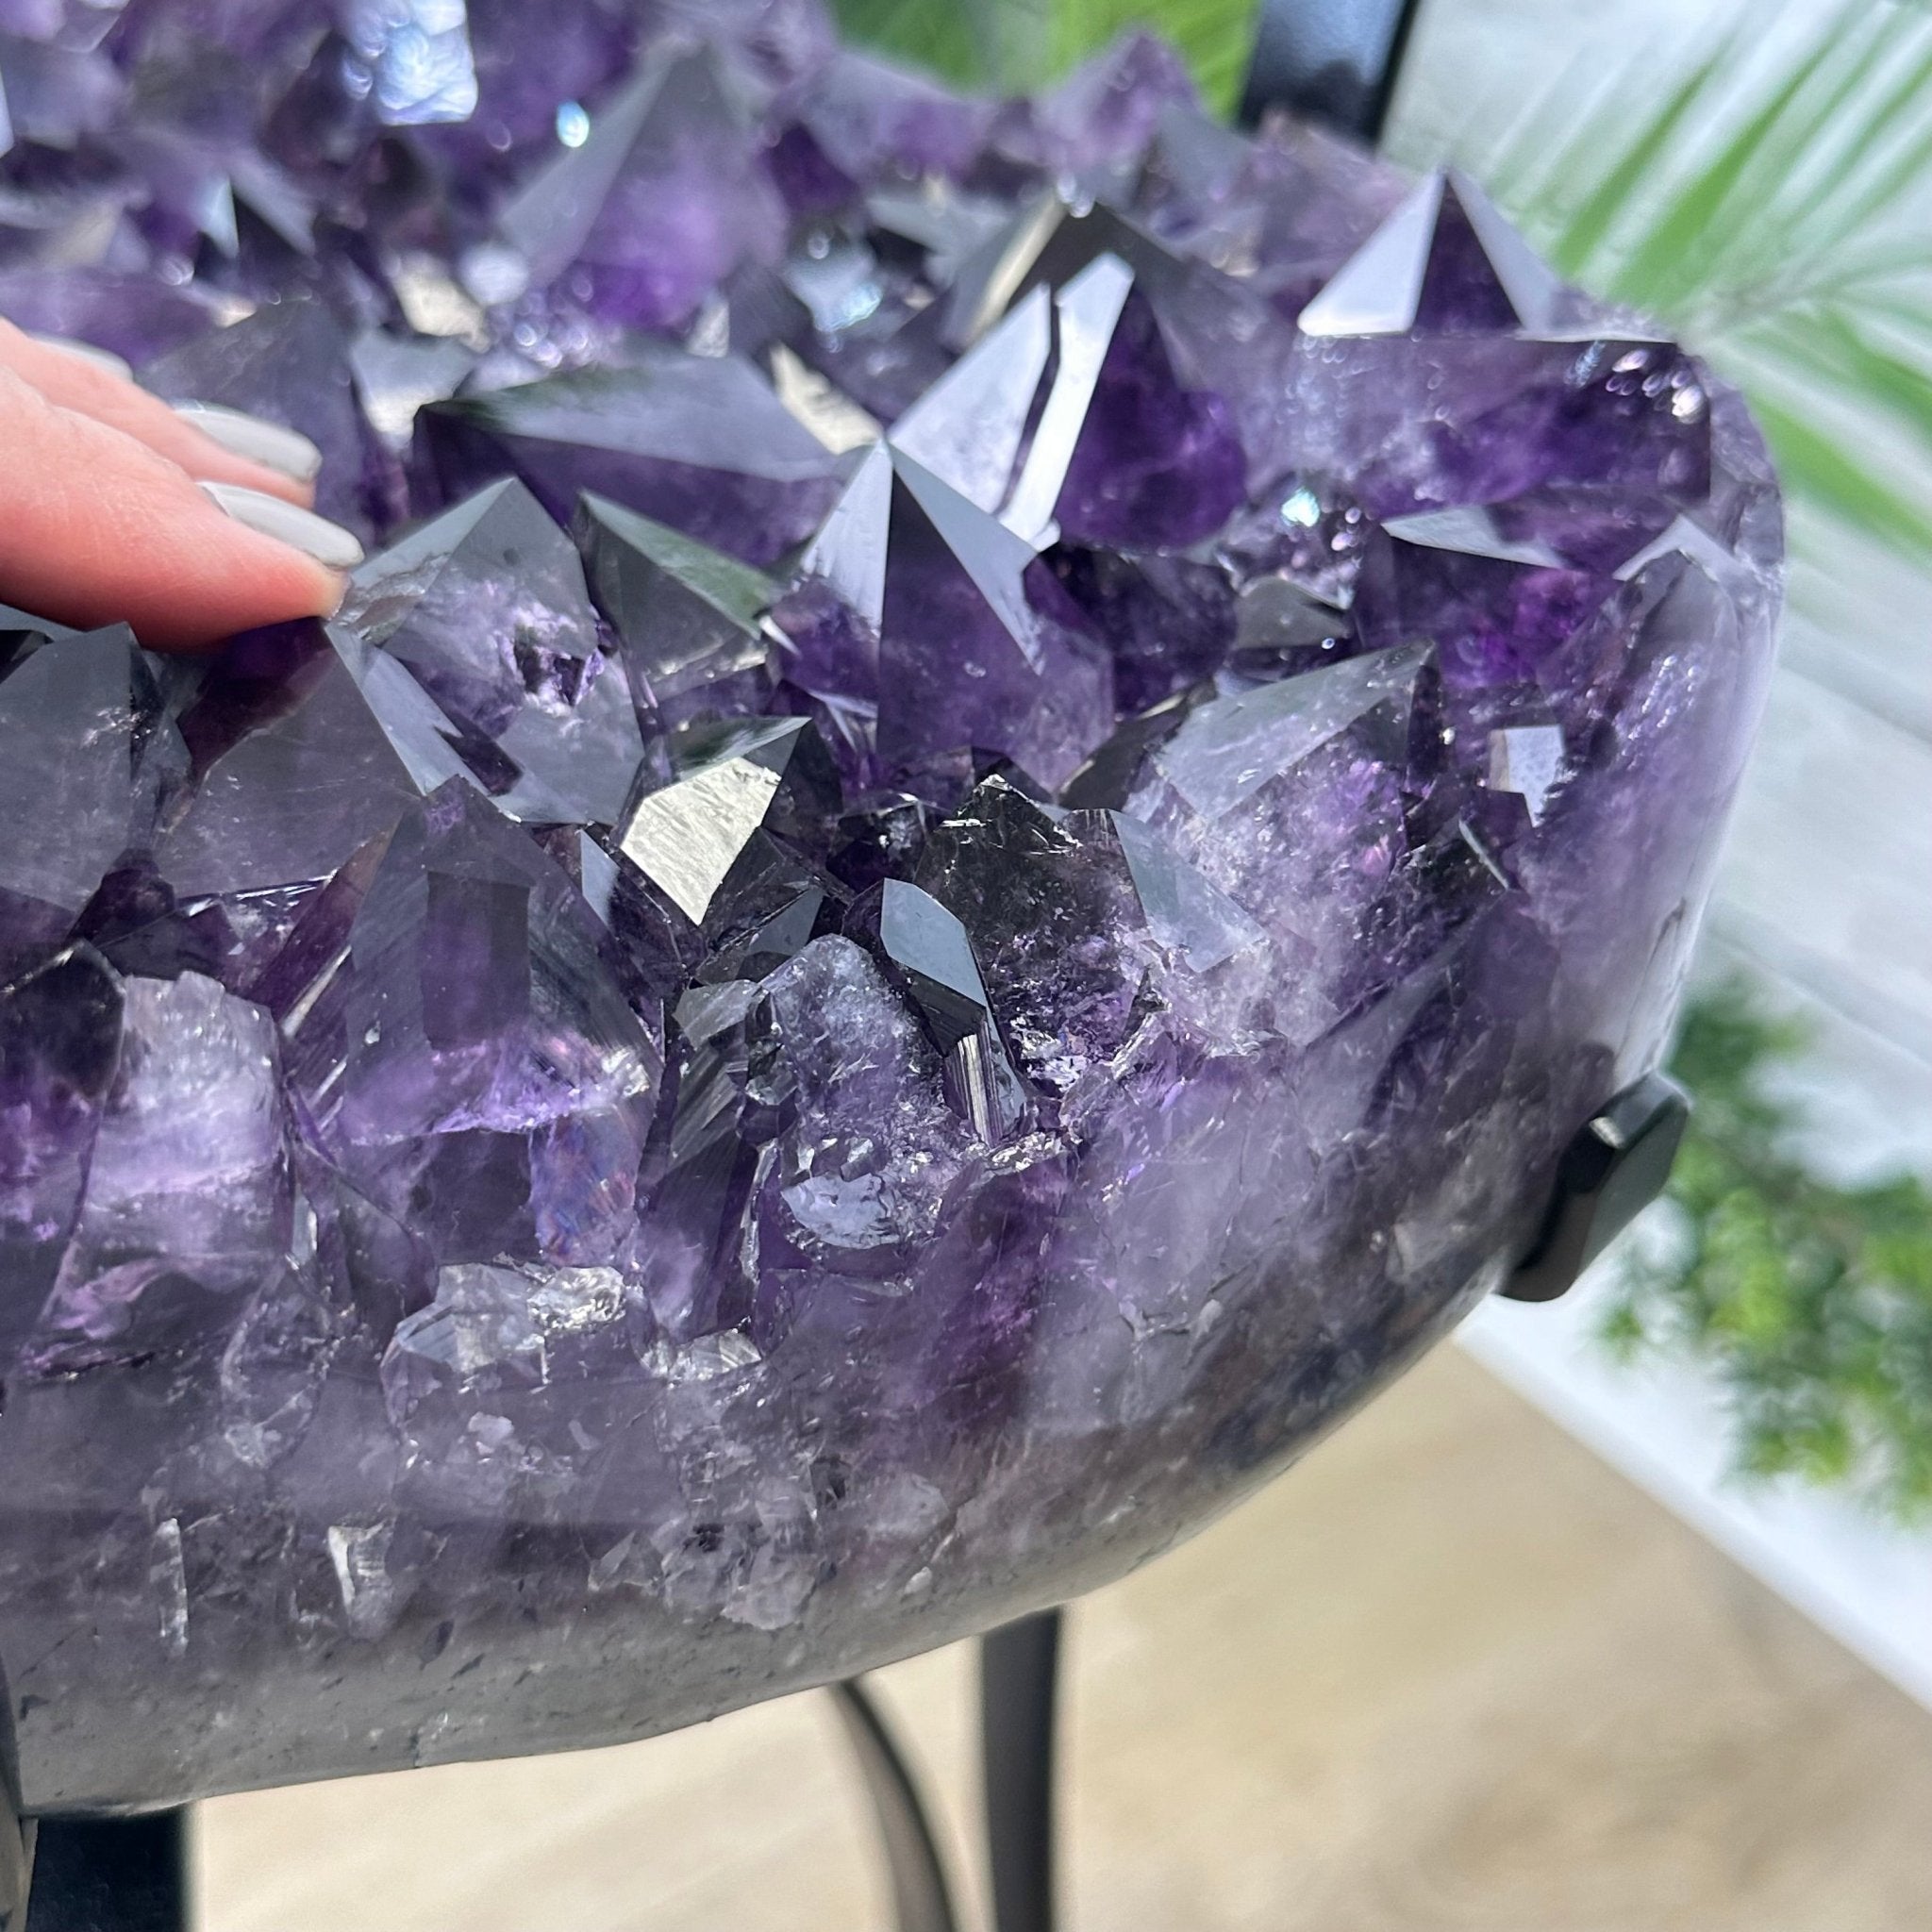 Super Quality Amethyst Geode Side Table, 38.6 lbs, 21.75" Tall #1384-0035 - Brazil GemsBrazil GemsSuper Quality Amethyst Geode Side Table, 38.6 lbs, 21.75" Tall #1384-0035Tables: Side1384-0035